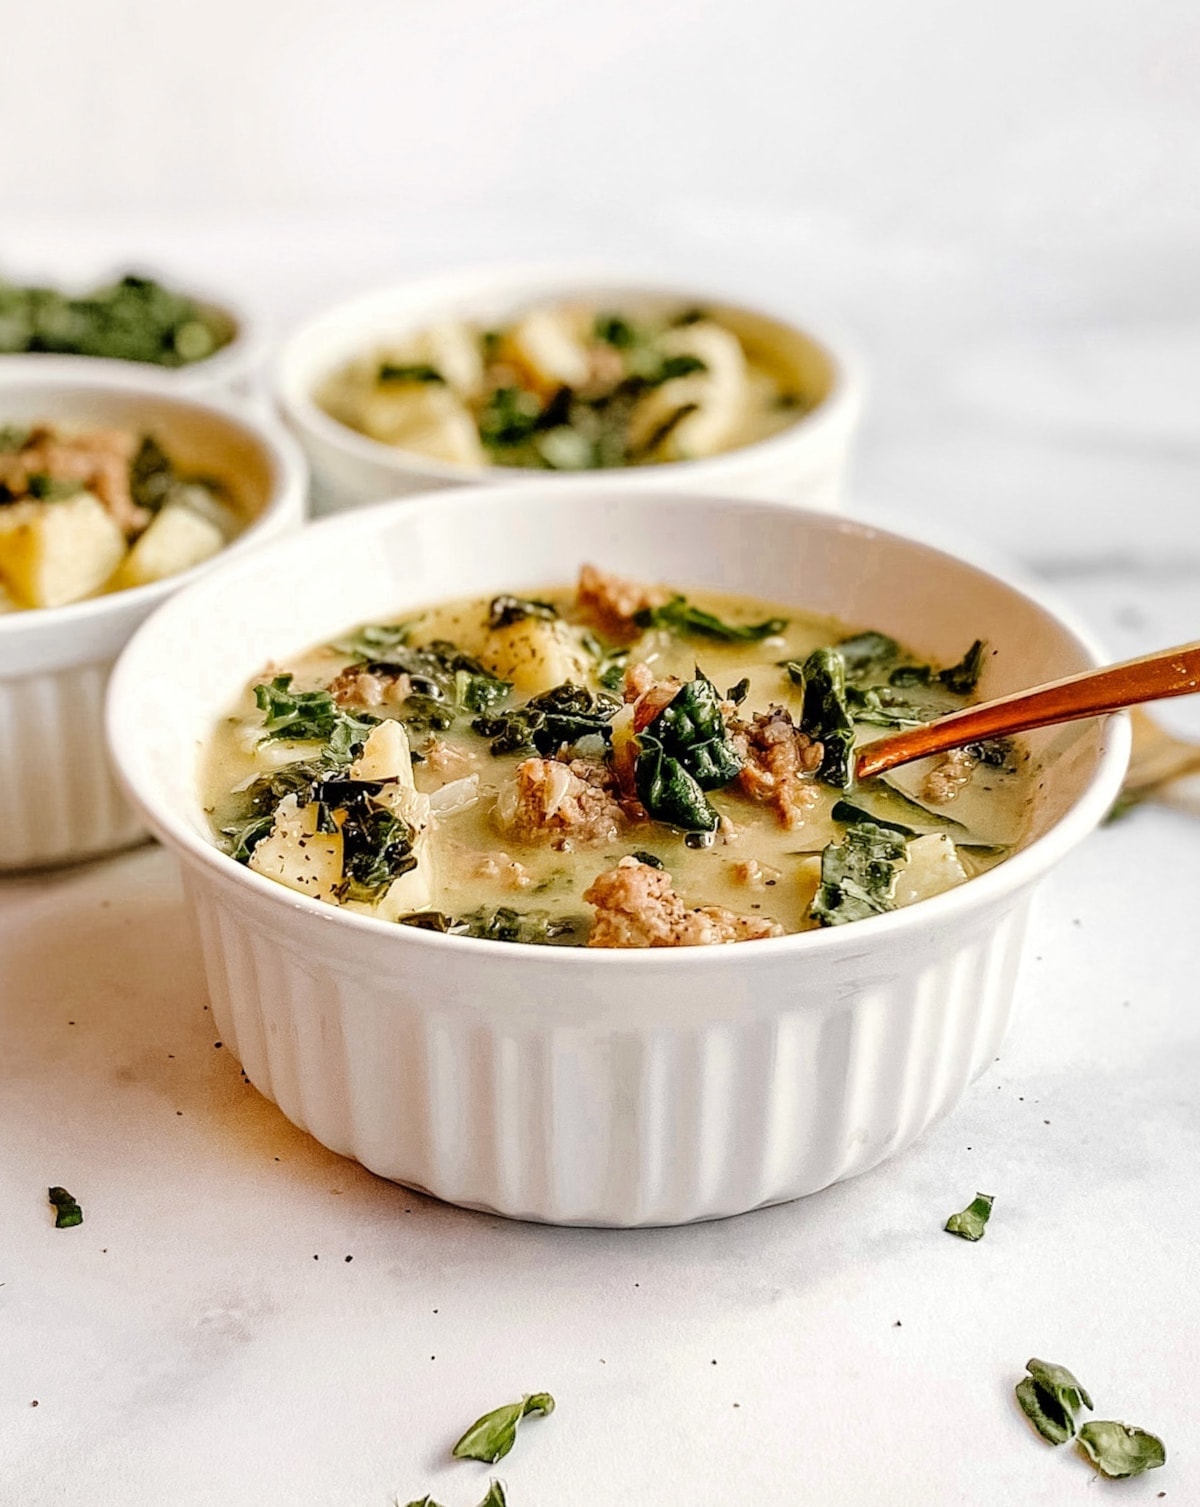 A bowl of gluten-free zuppa toscana soup with two additional bowls in the background. You can see chunks of meat, potatoes, and kale in the soup.